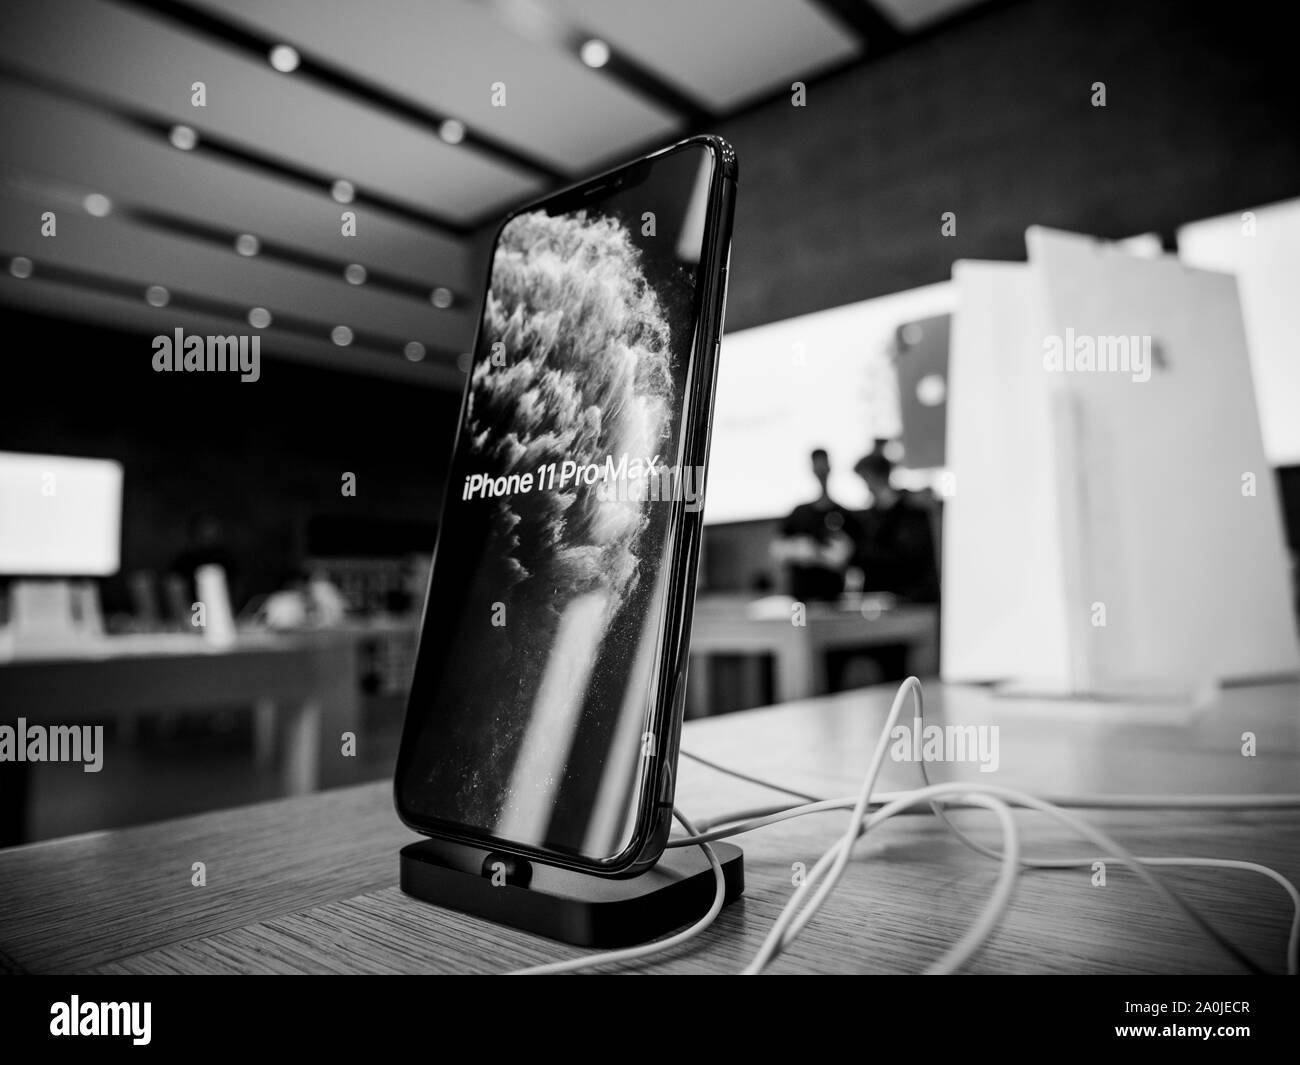 Paris, France - Sep 20, 2019: The new iPhone 11 Pro Max displayed in Apple Store as the smartphone by Apple Computers goes on sale - silhouettes of people in background demo screensaver black and white Stock Photo